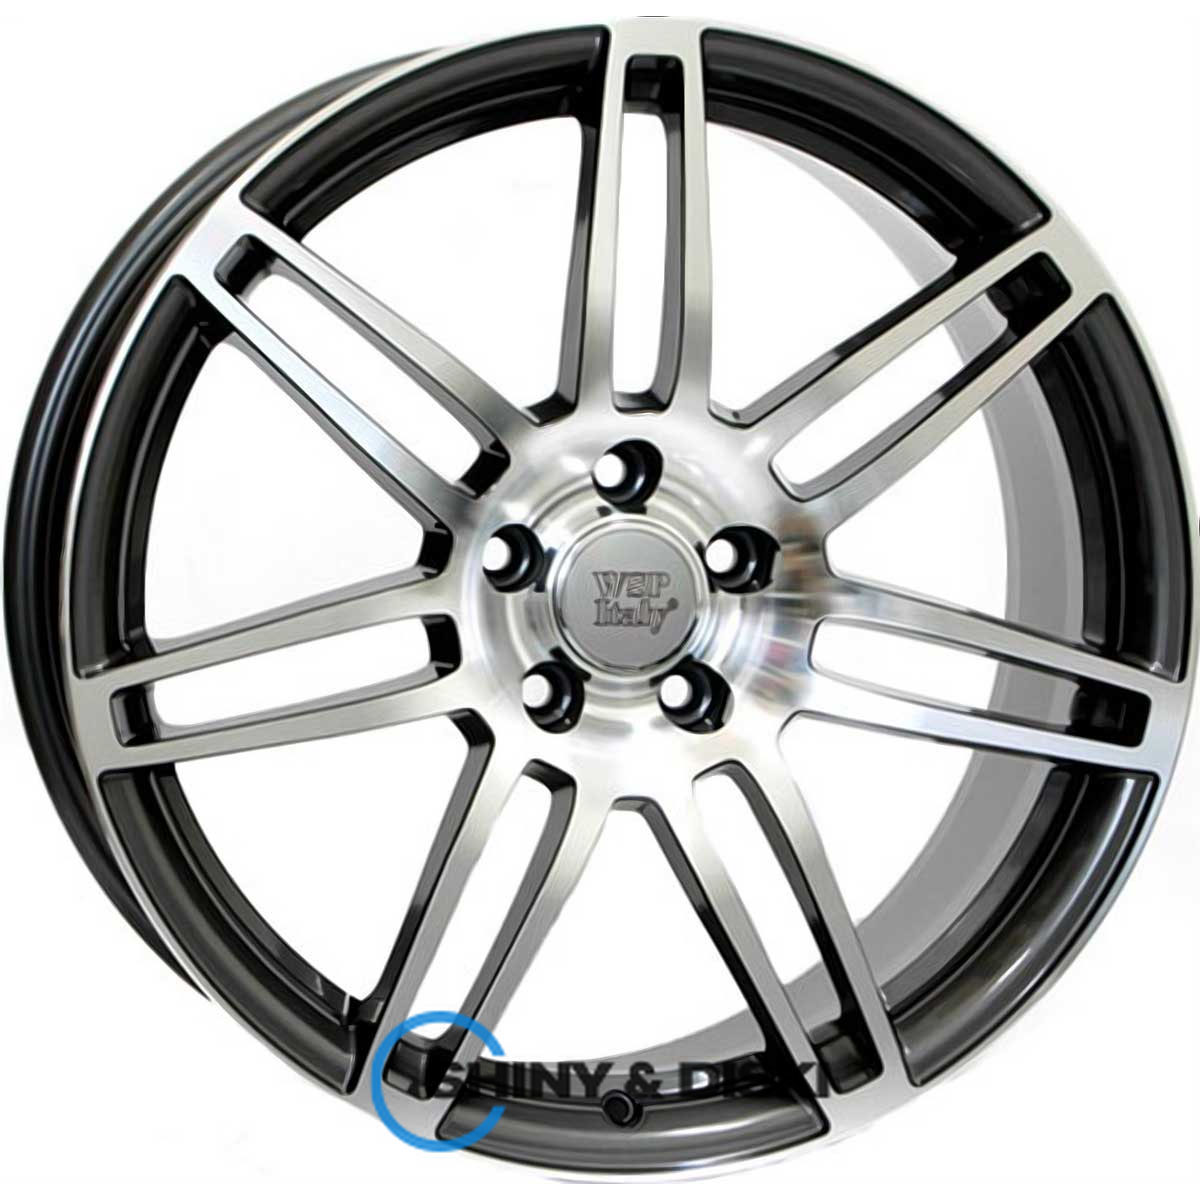 wsp italy audi w557 s8 cosma two ap